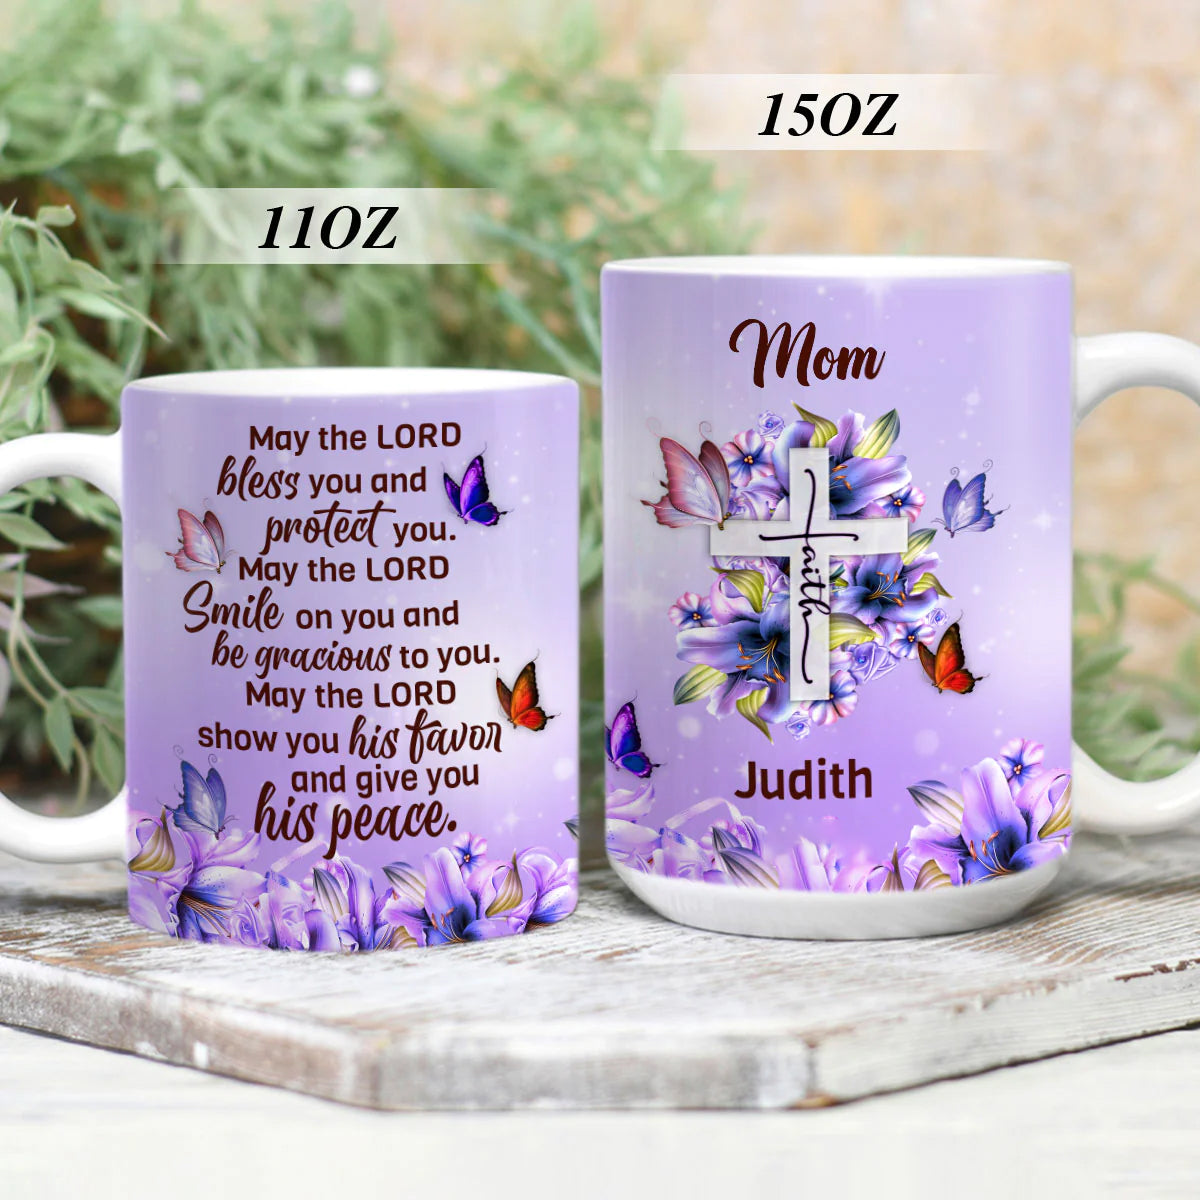 Christianartbag Drinkware, May The Lord Bless You, Personalized Mug, Tumbler, Personalized Gift for Mom - Christian Art Bag